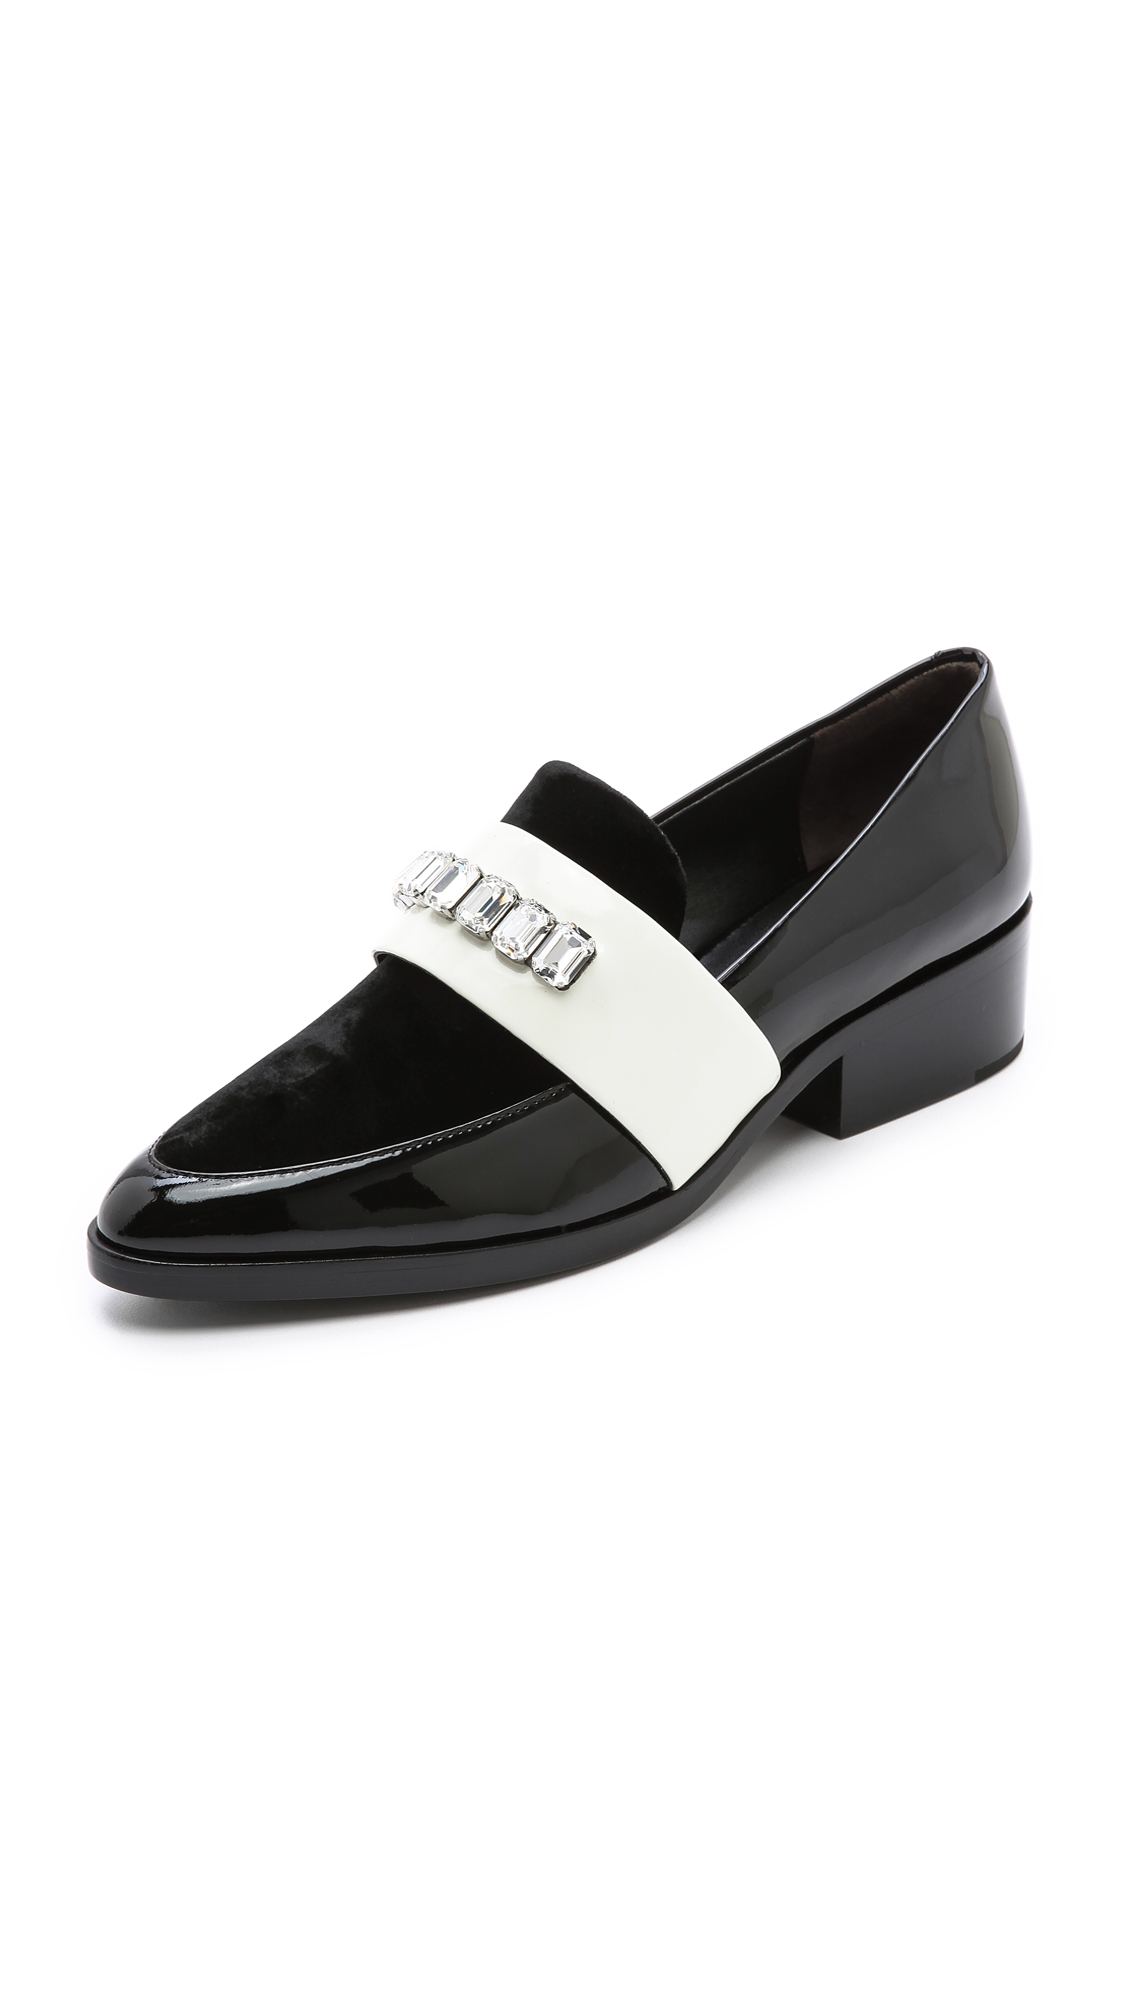 Lyst - 3.1 phillip lim Quinn Loafers with Stones in Black